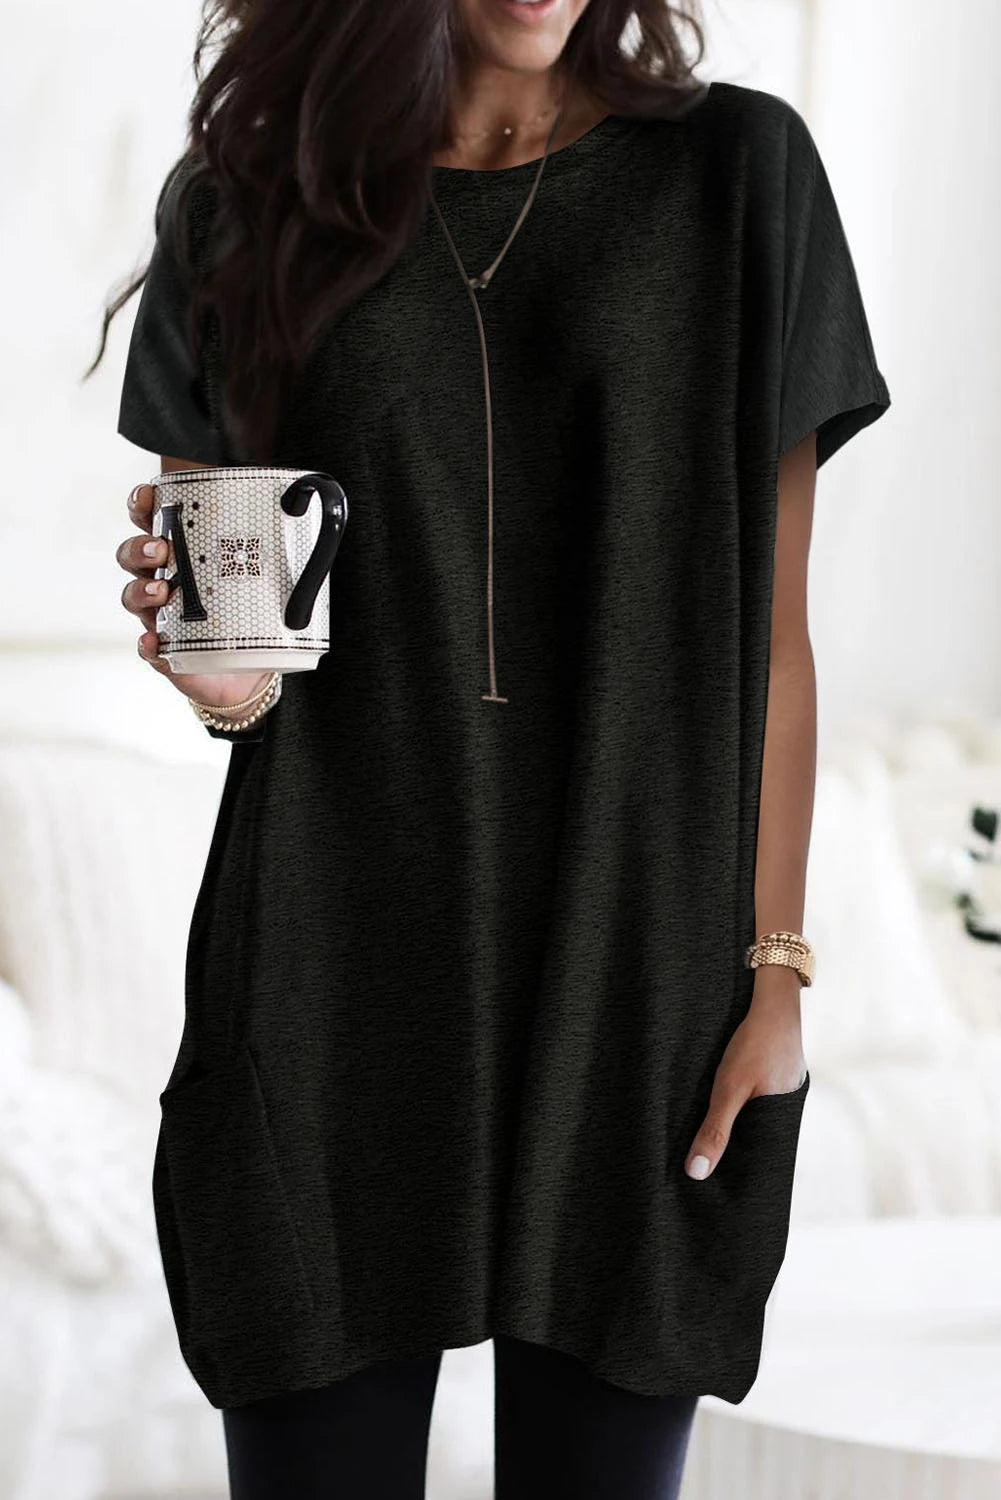 WOMAN WEARING A PLUS SIZE BLACK TUNIC WITH POCKETS